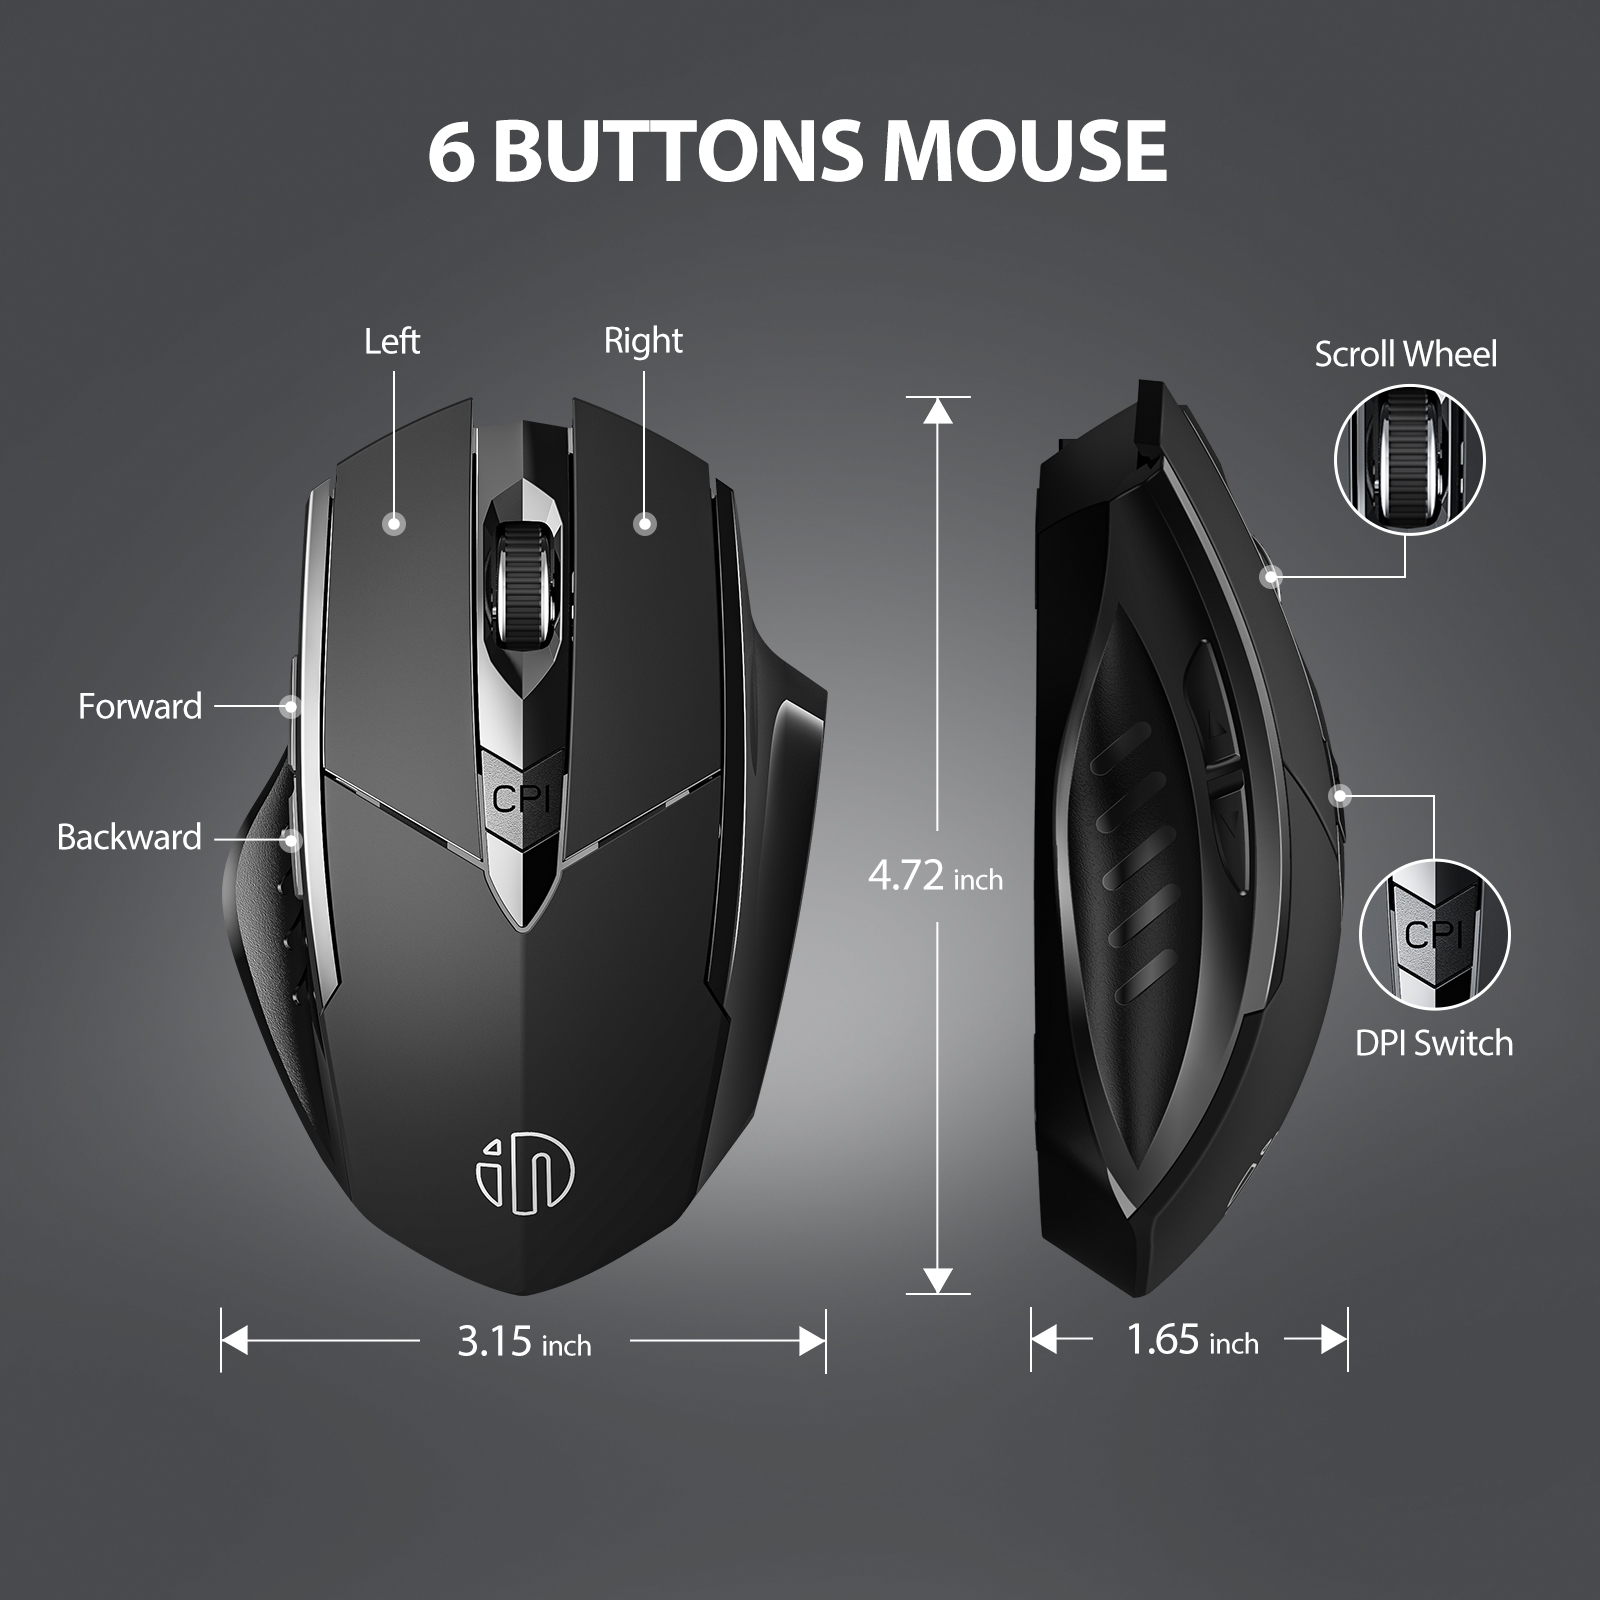 Wireless Mouse Rechargeable, Inphic Ergonomic Silent Click USB 2.4G Cordless Mouse for Laptop PC Computer Tablets Windows Linux, 6 Buttons, 1600DPI 3 Adjustment Levels, Black